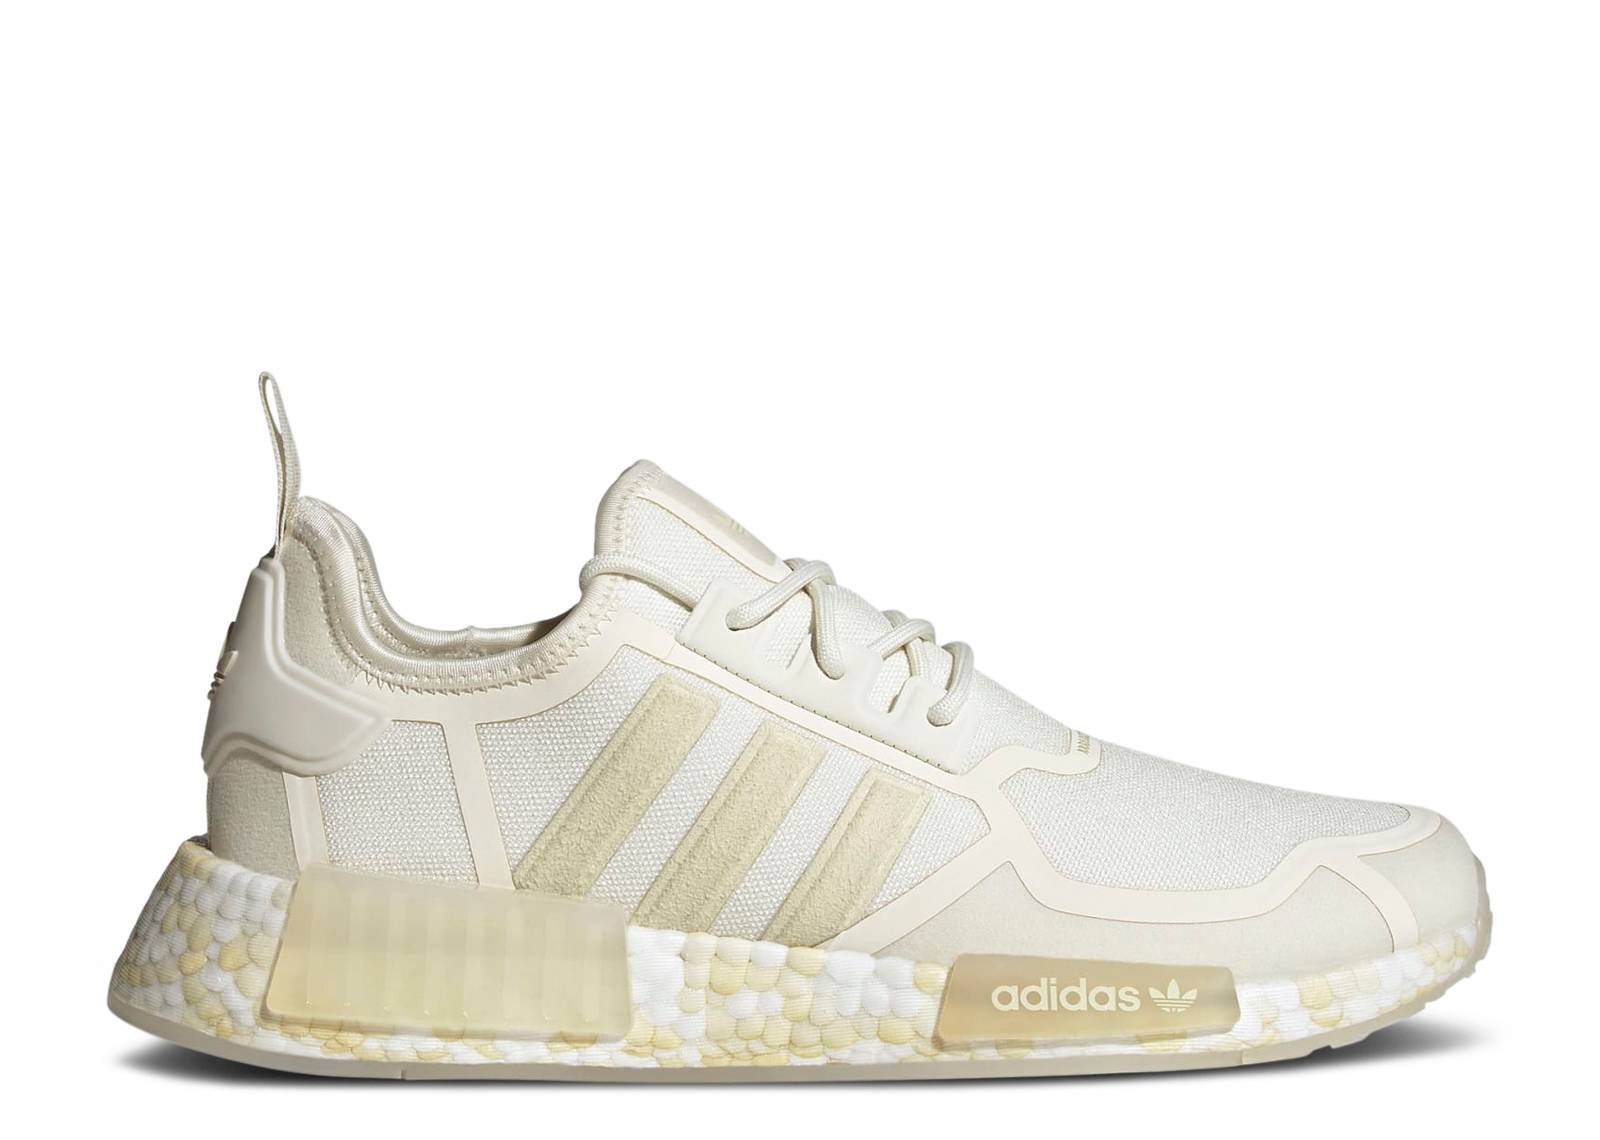 NMD_R1 'Off White Sand'